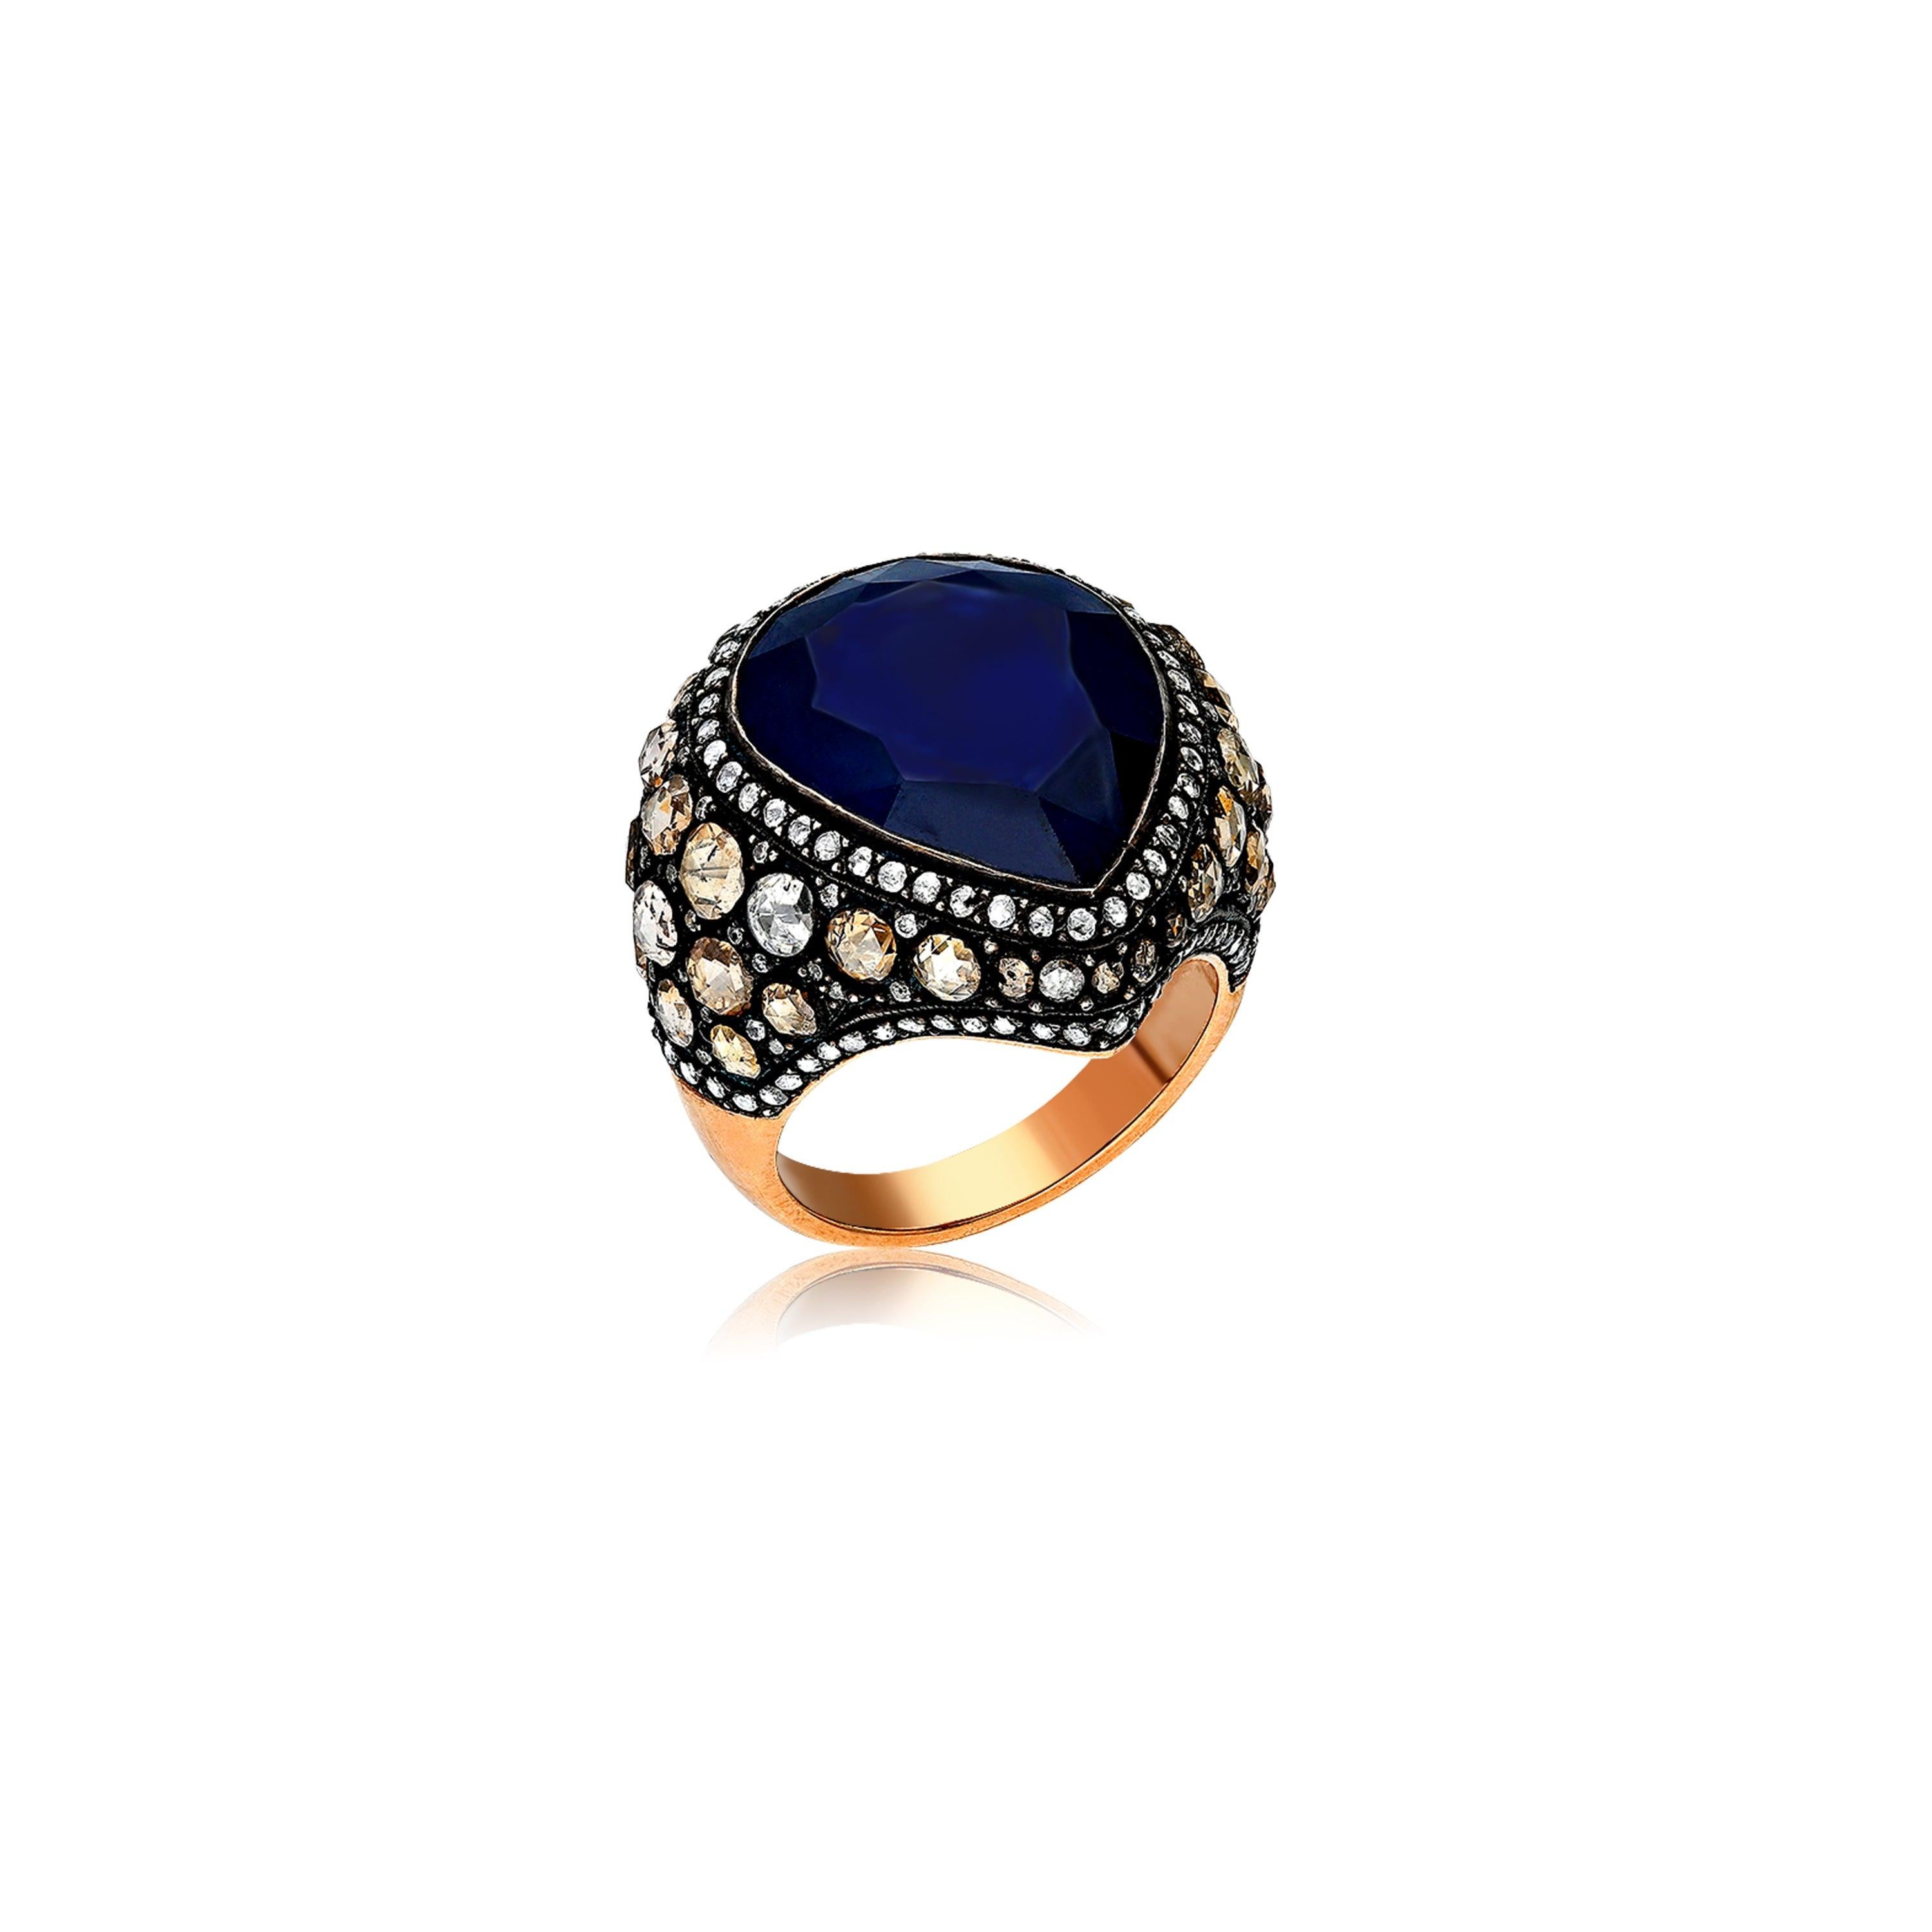 For Sale:  8K Gold and Silver Cocktail Ring with a Sapphire and White Rose Cut Diamonds 3